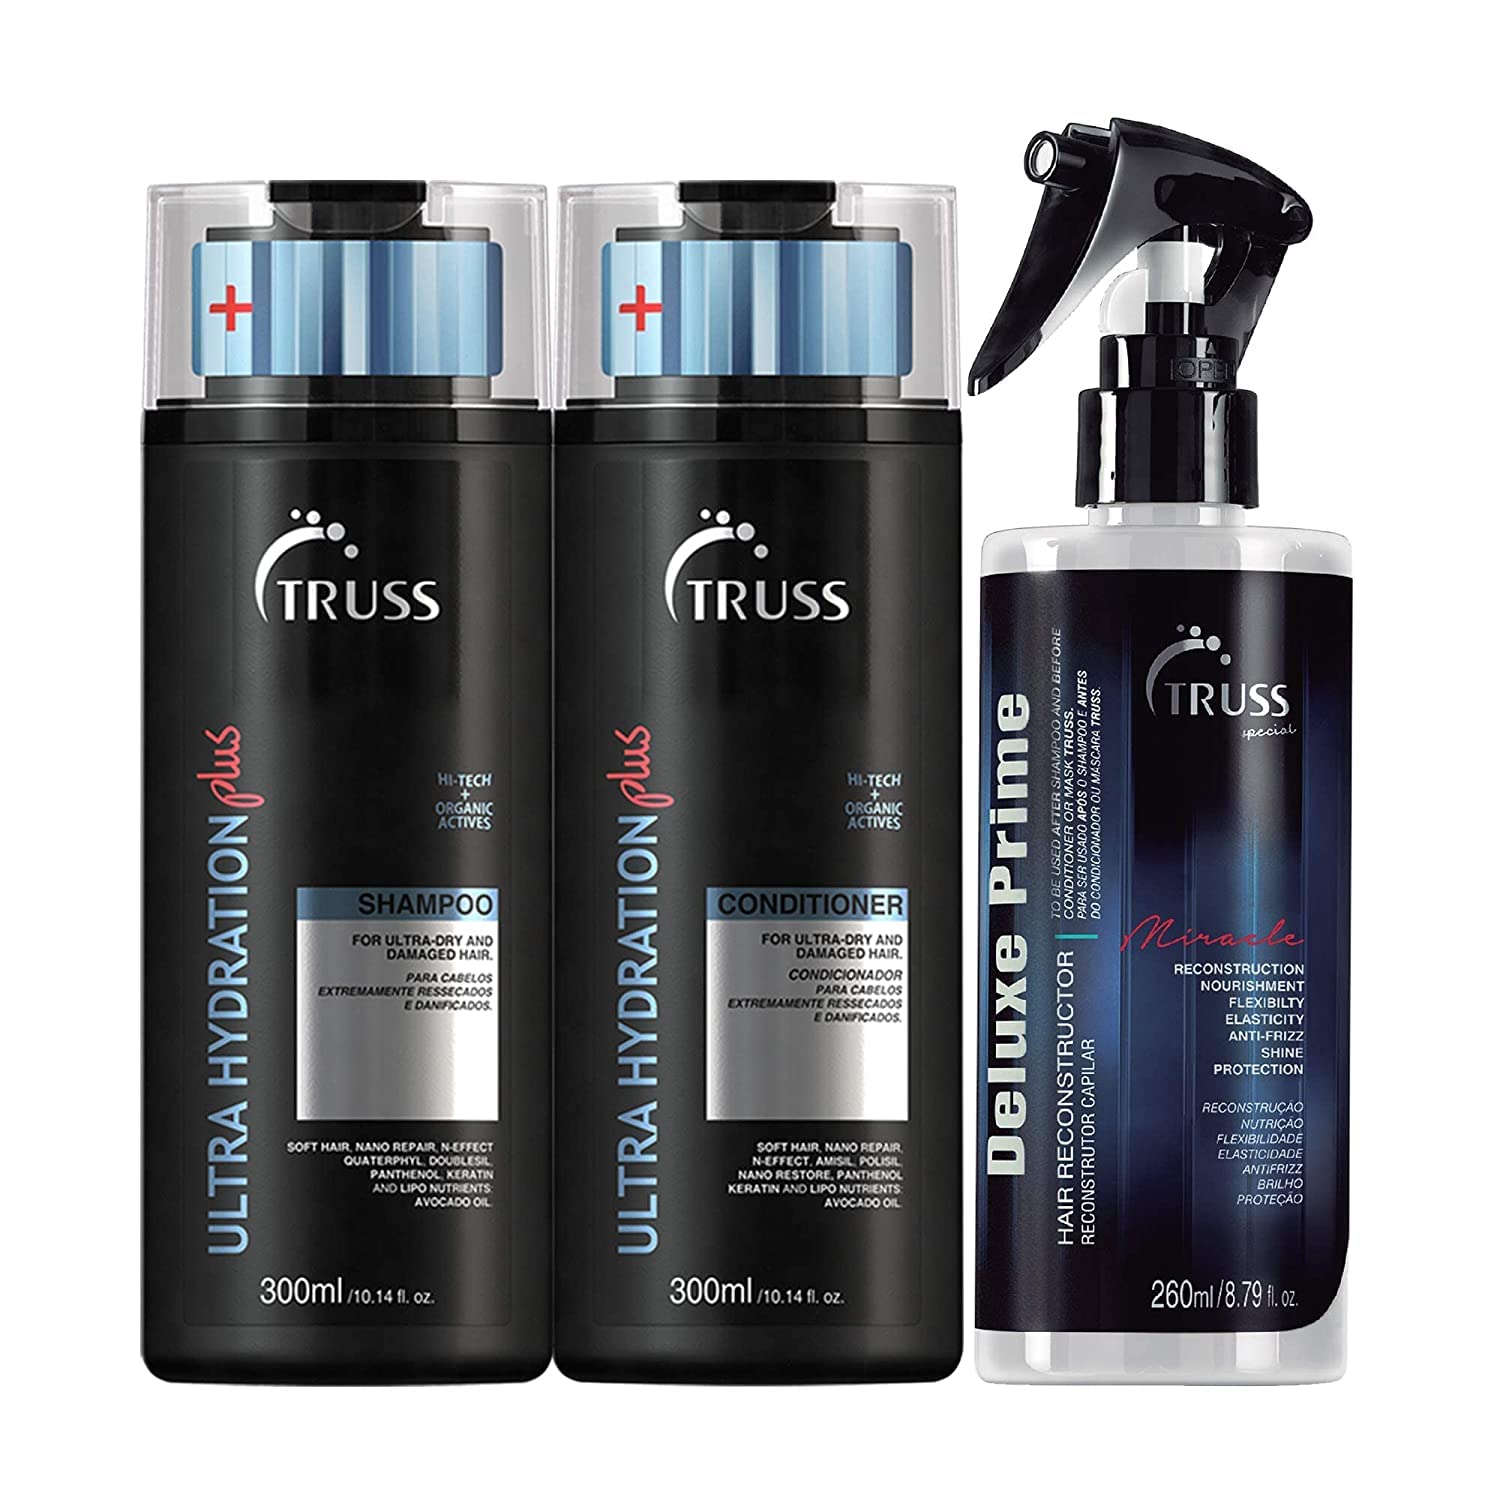 TRUSS Ultra Hydration PLUS Shampoo and Conditioner Set Bundle with Deluxe Prime Hair Treatment